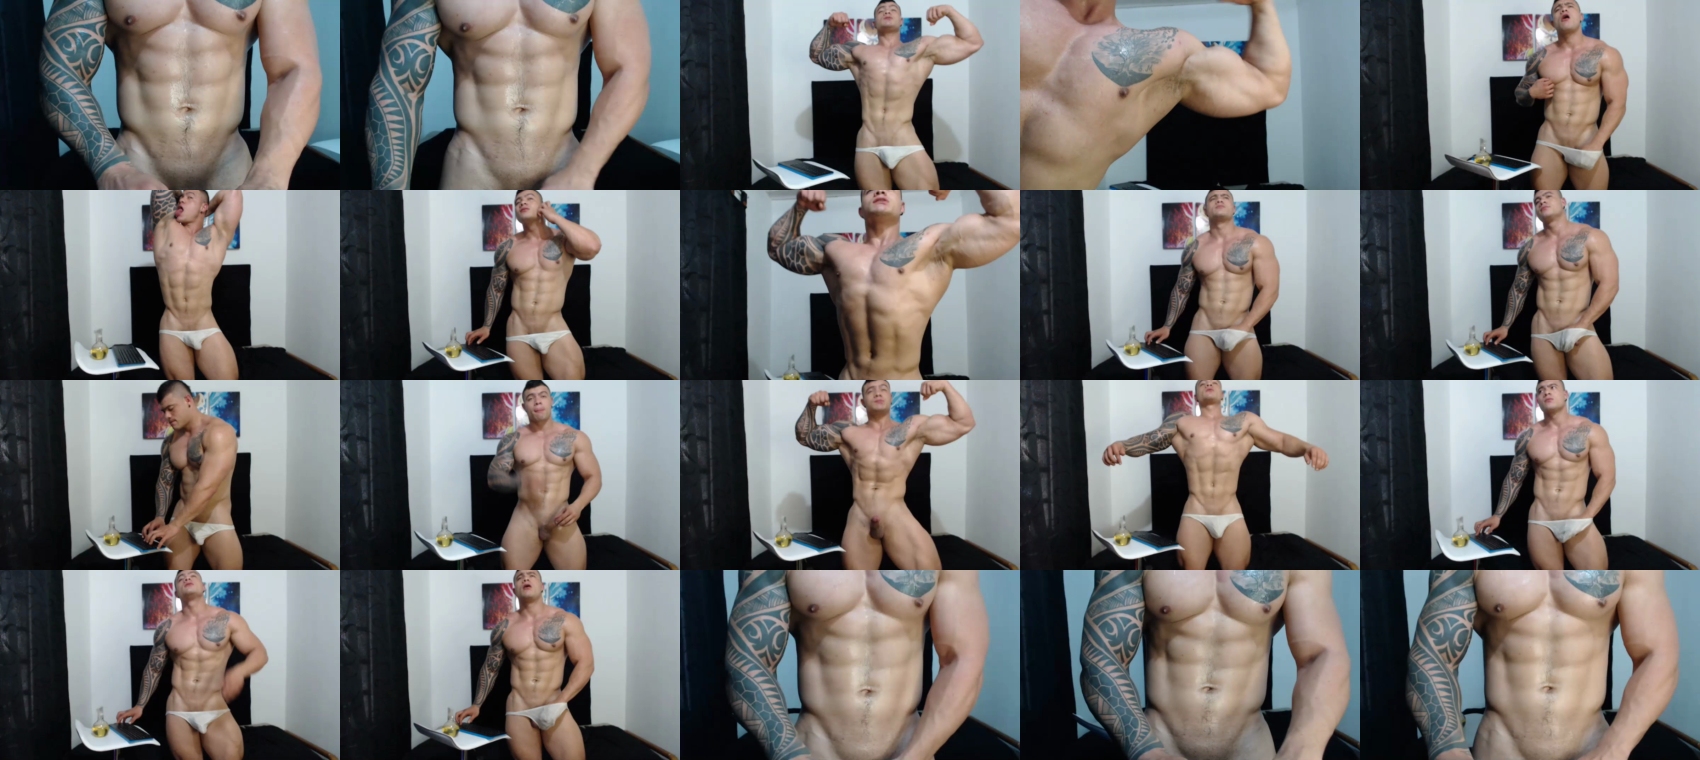 college_muscle_ass  28-12-2021 Males bicurious